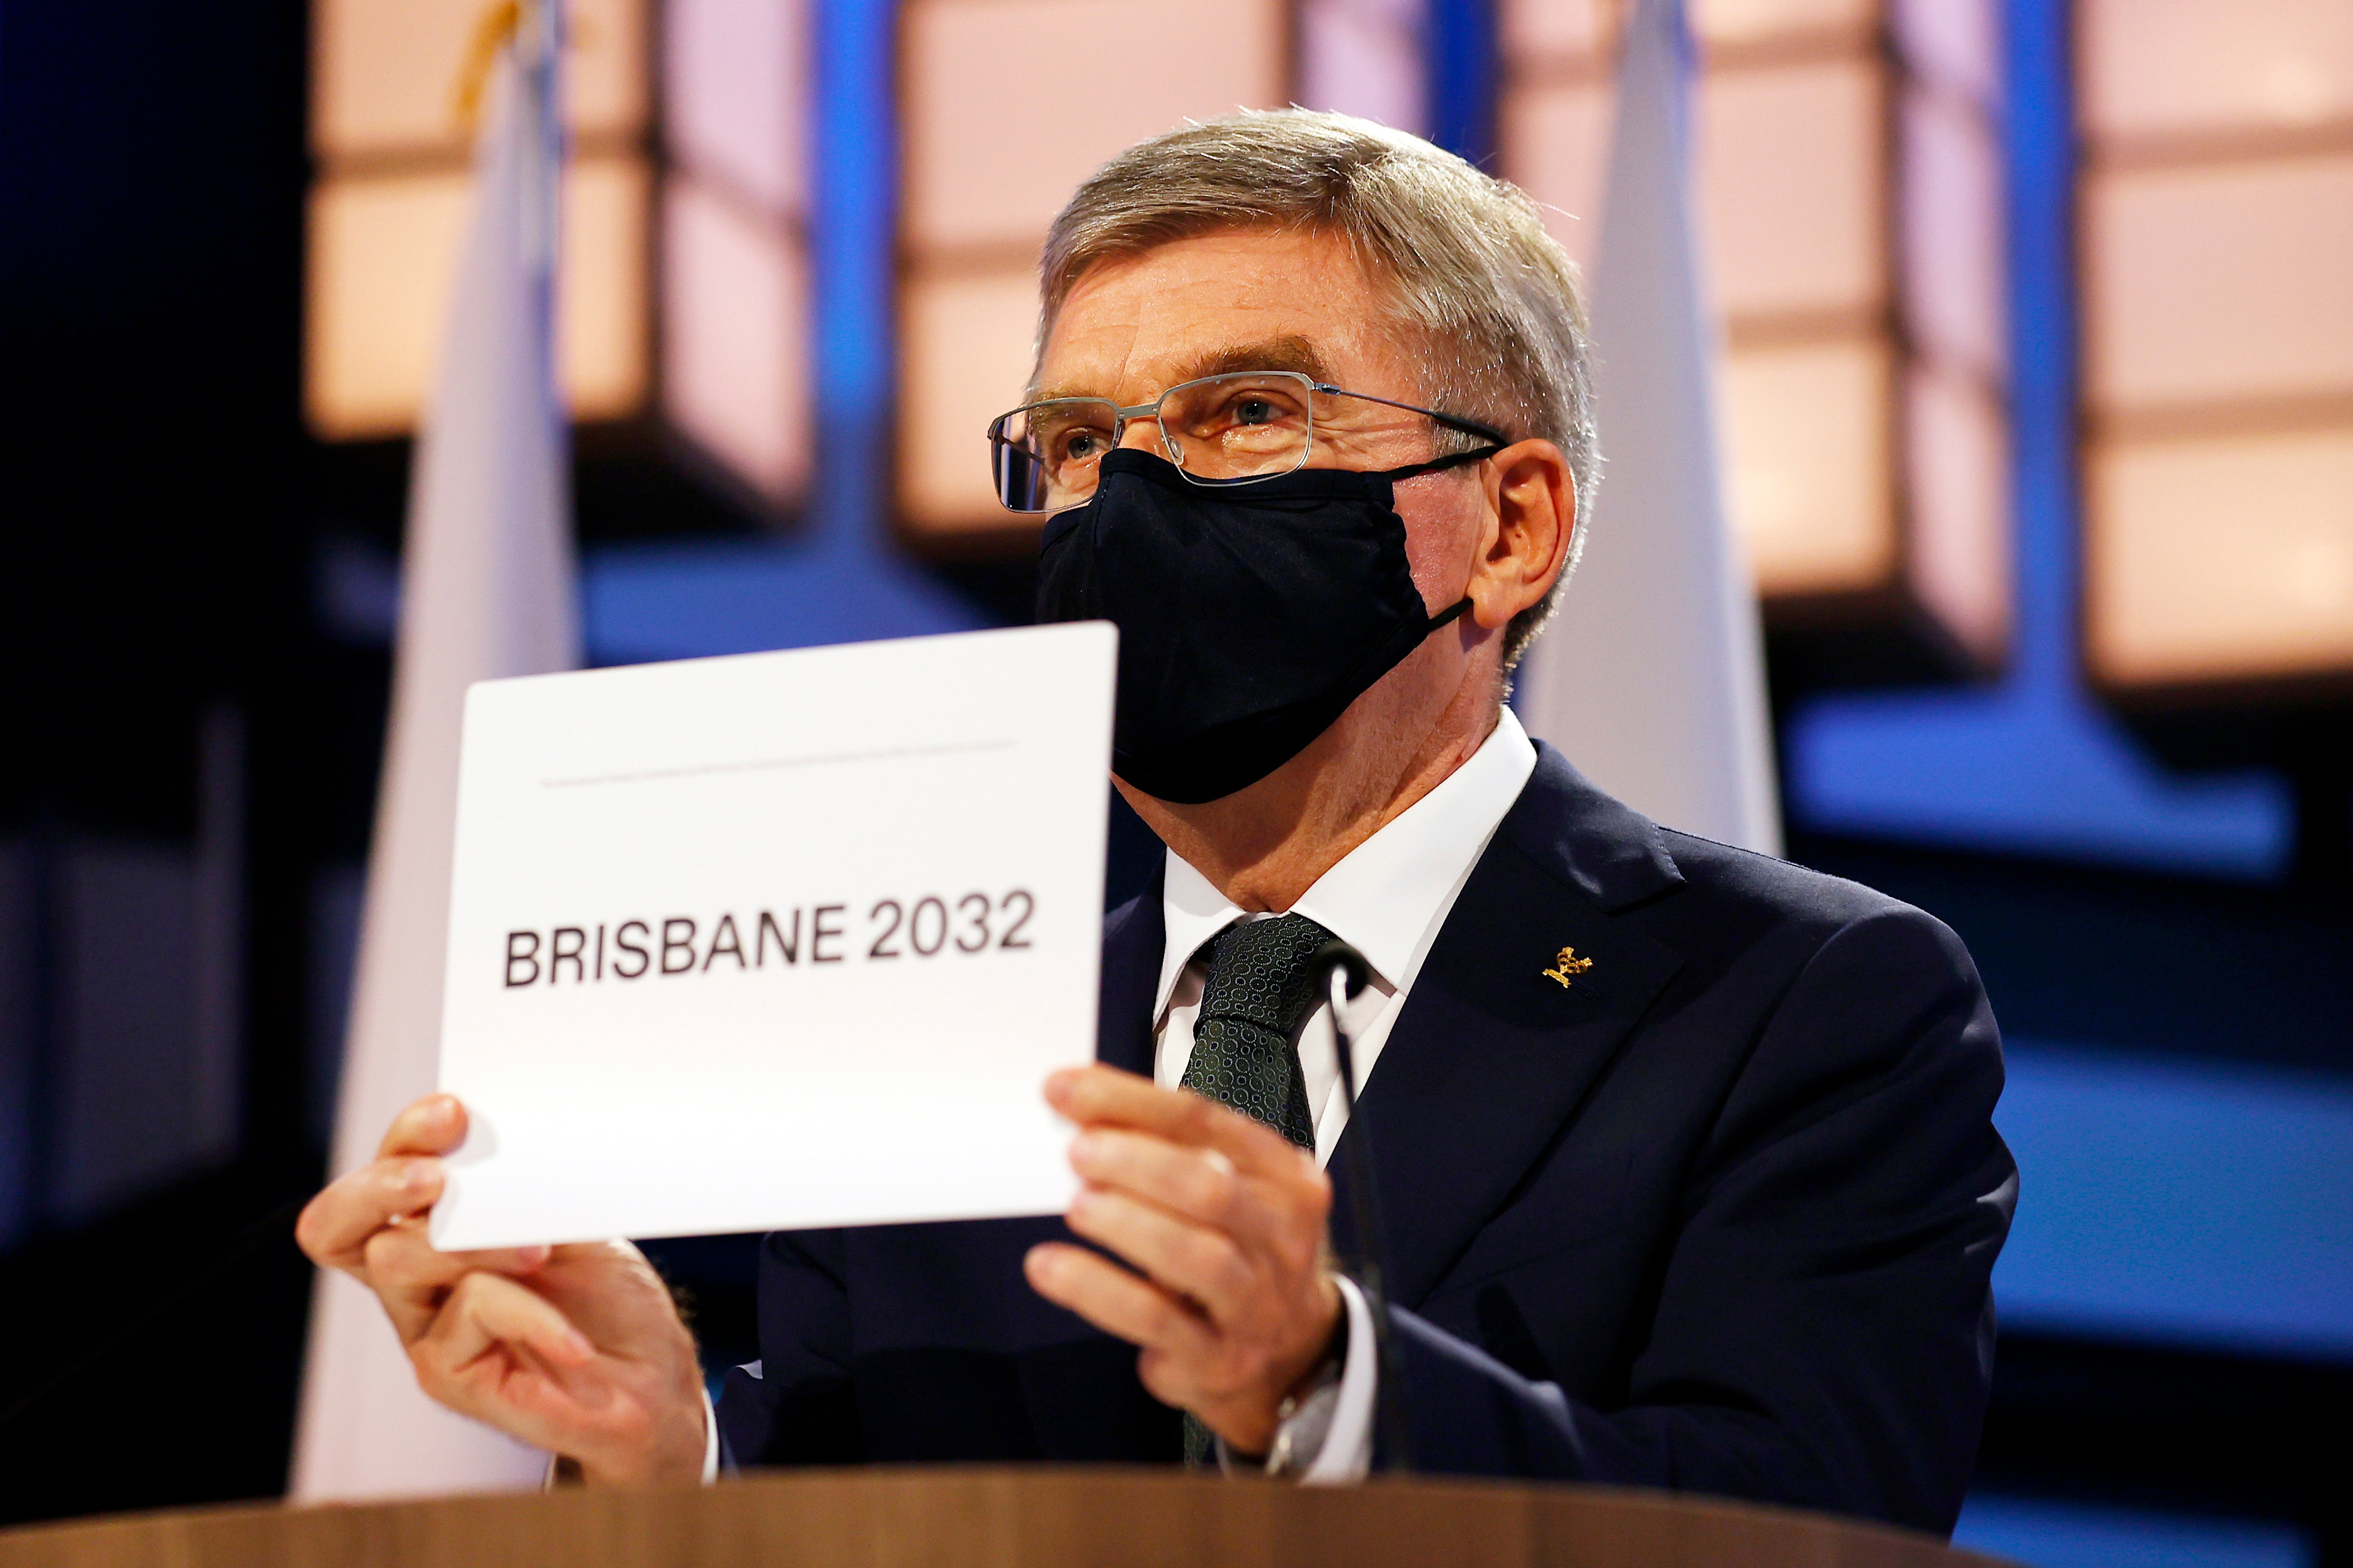 President of the International Olympic Committee Thomas Bach announces Brisbane as the 2032 Summer Olympics host city during the 138th IOC Session at Hotel Okura in Tokyo, Wednesday, July 21, 2021. (Toru Hanai/Pool Photo via AP)